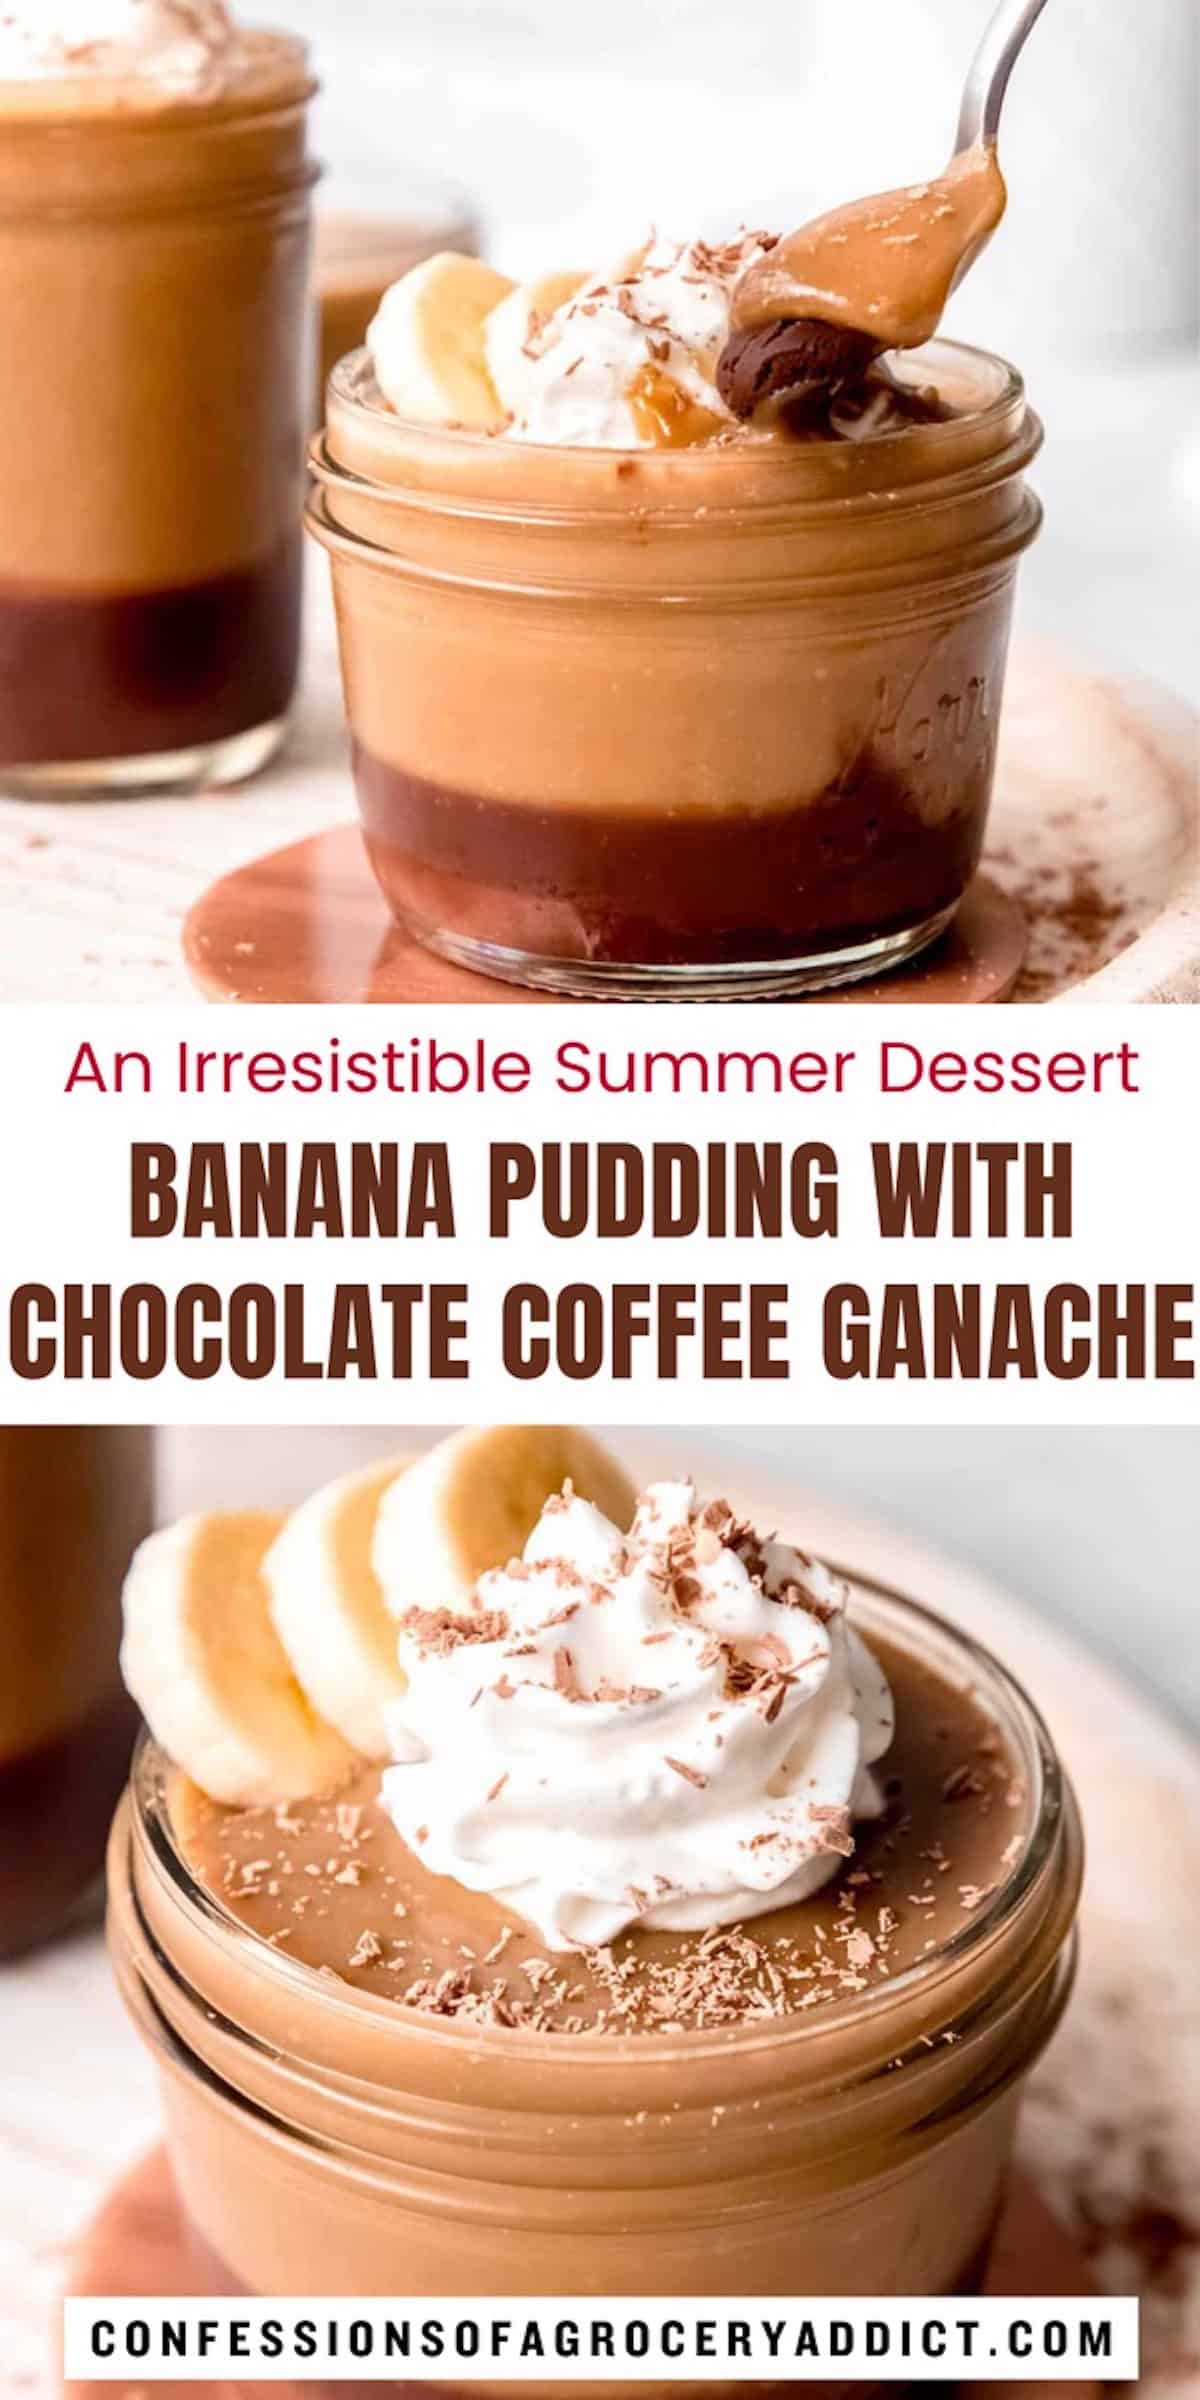 vertical pin with two images: the top has a spoon taking a bite of the banana pudding with chocolate coffee ganache, the bottom showing a banana pudding cup garnished with whipped cream, banana slices, and chocolate shavings; there is text overlay reading" an irresistible summer dessert; banana pudding with chocolate coffee ganache."